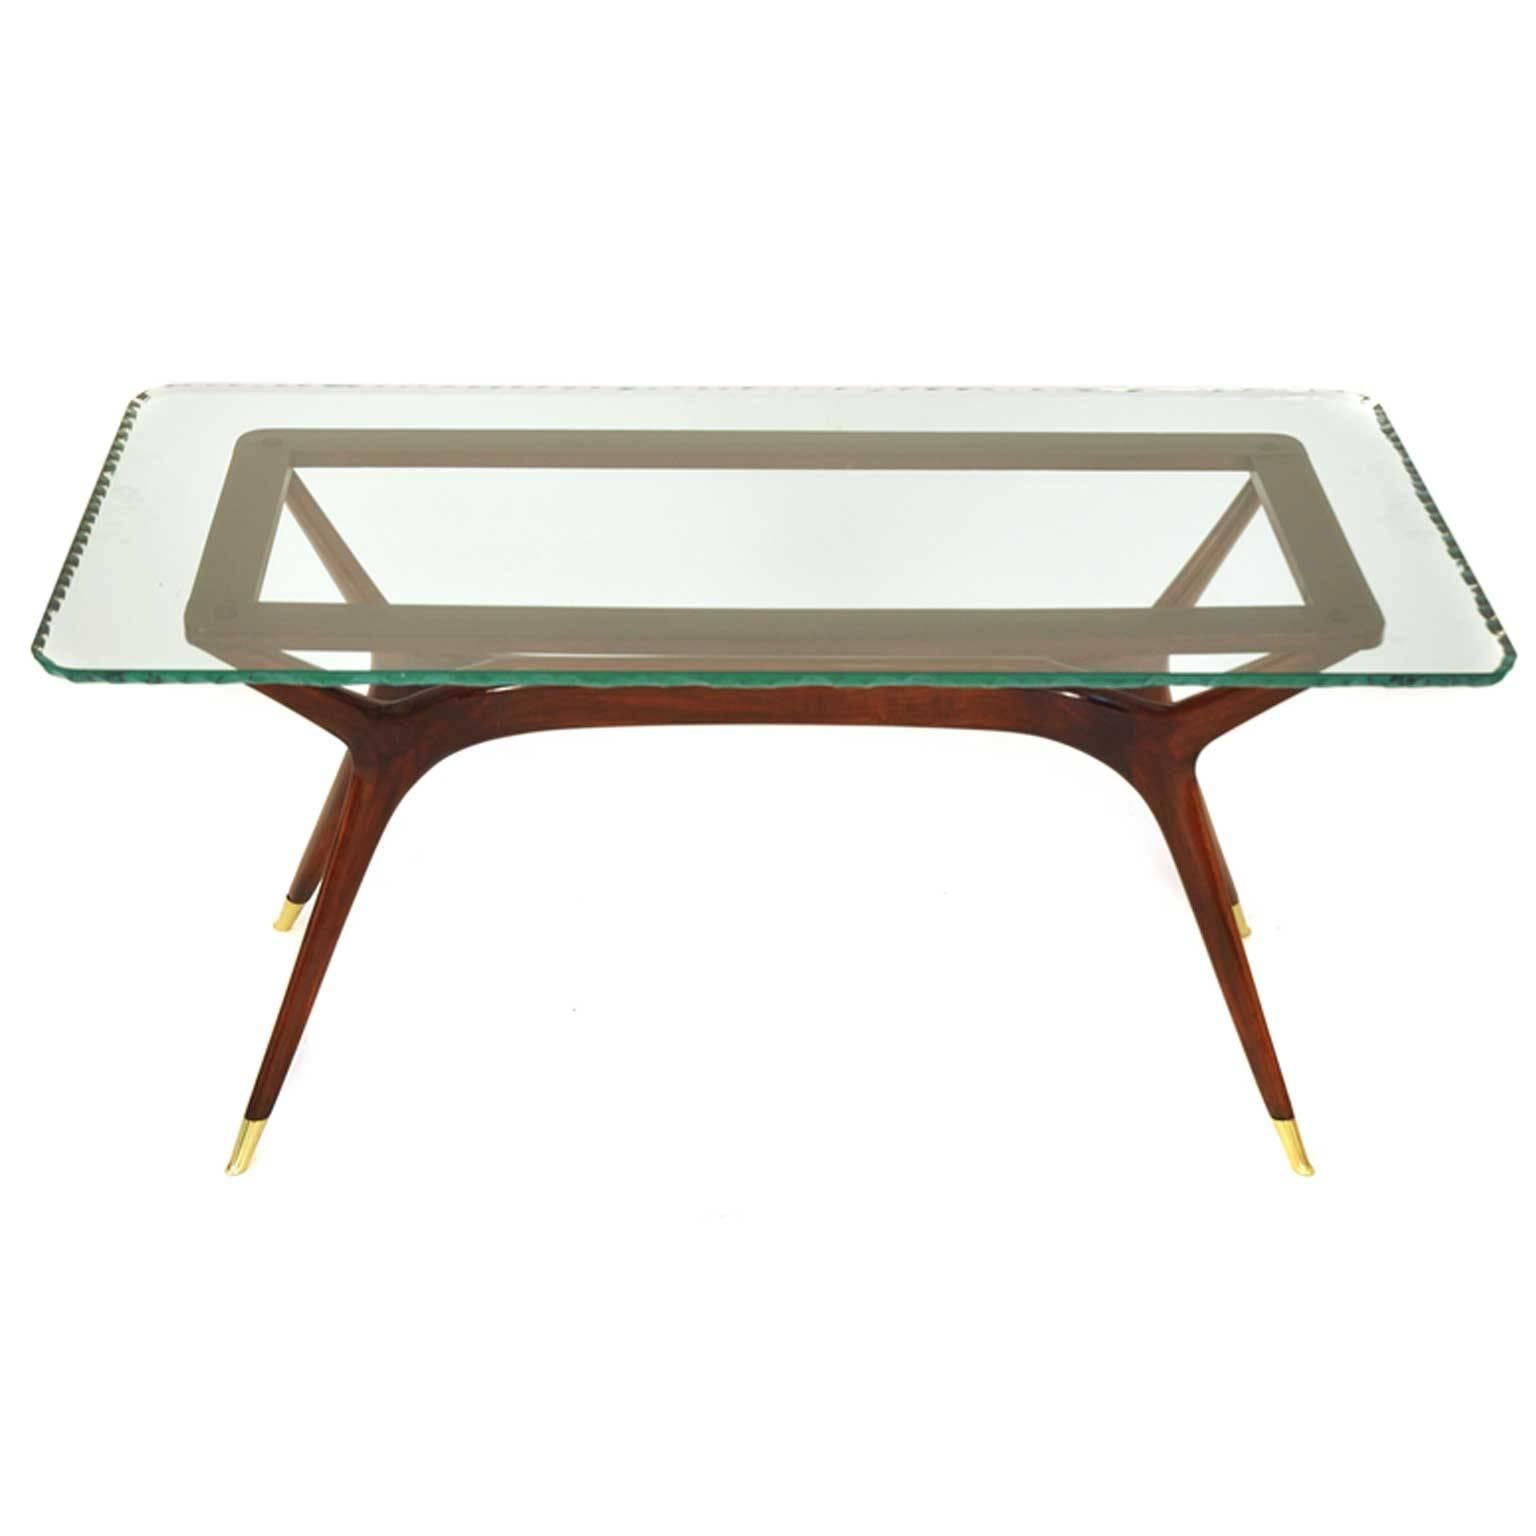 This piece was made in Italy in 1950s. Probably the design is from Ico Parisi. It is made of stained hardwood with a tabletop made of glass. The feet are covered with brass.